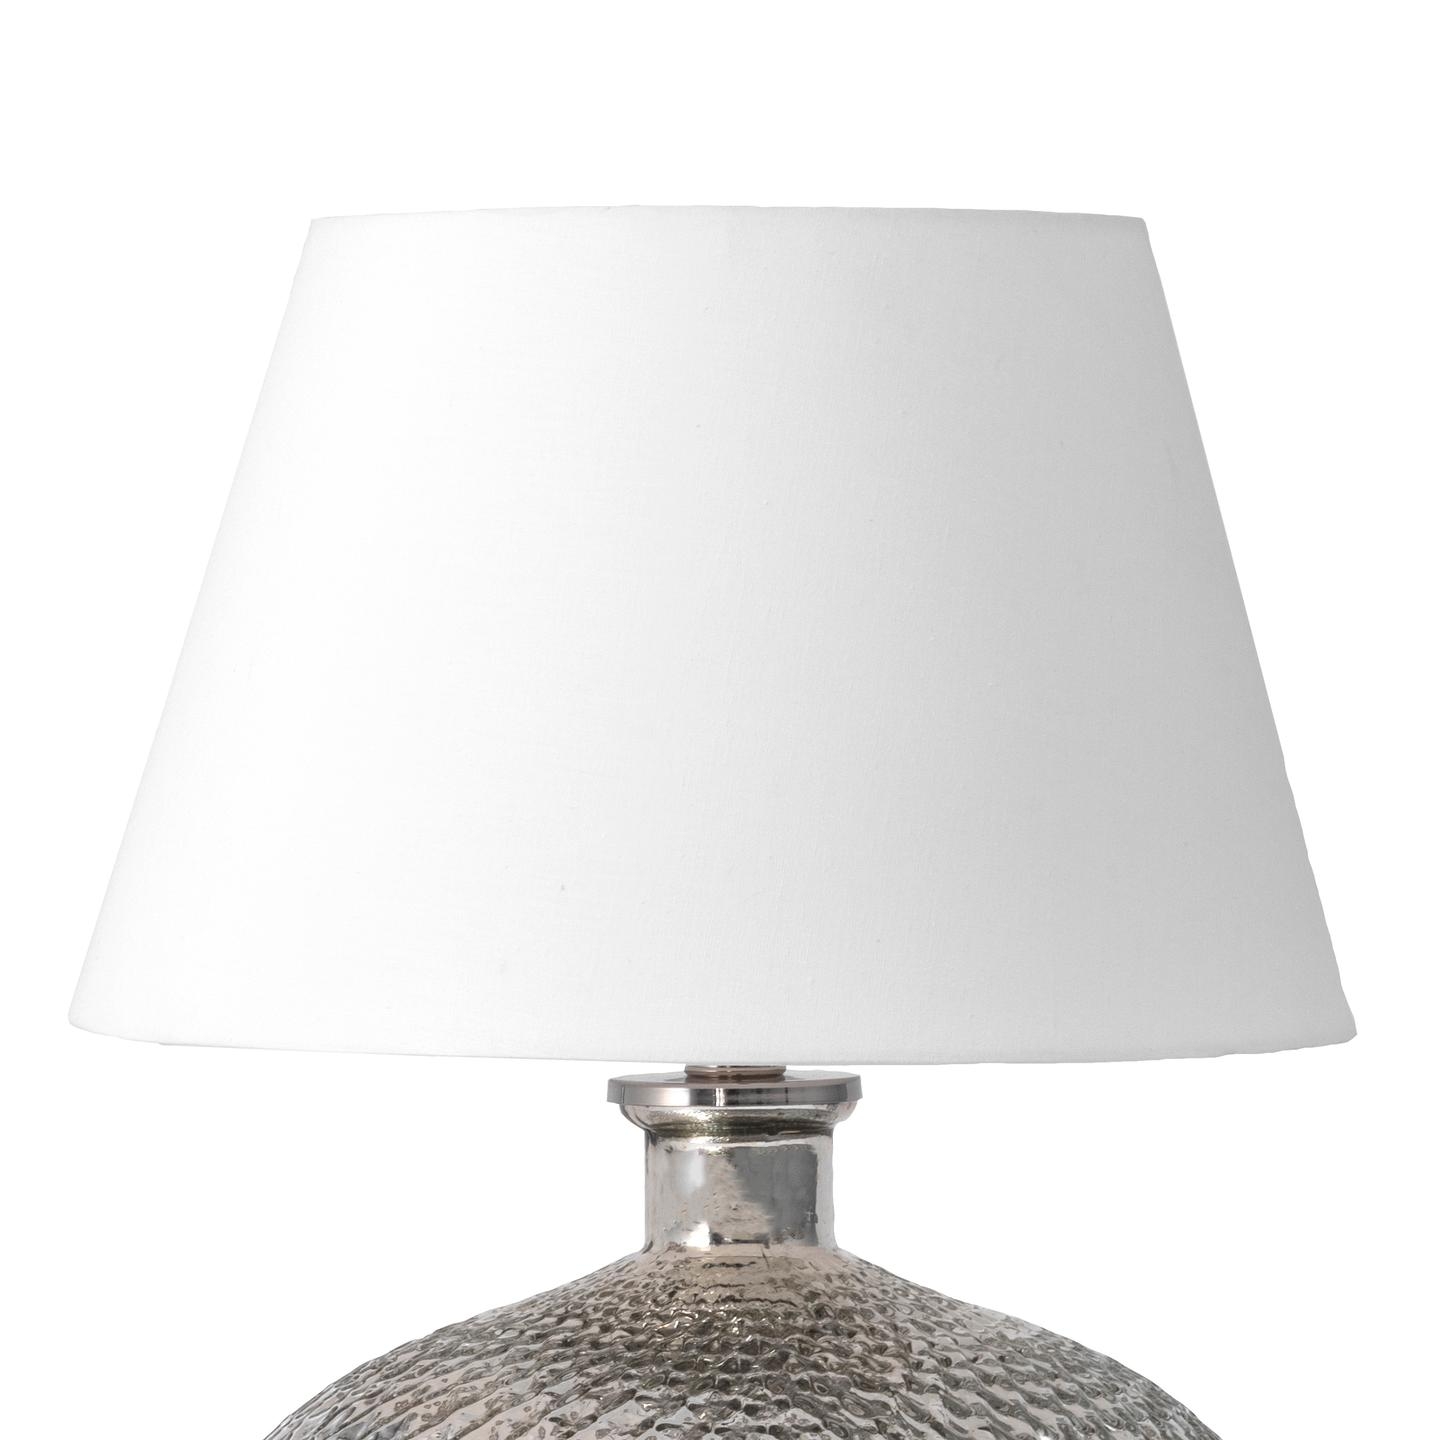 Alhambra 19" Glass Table Lamp - Image 4